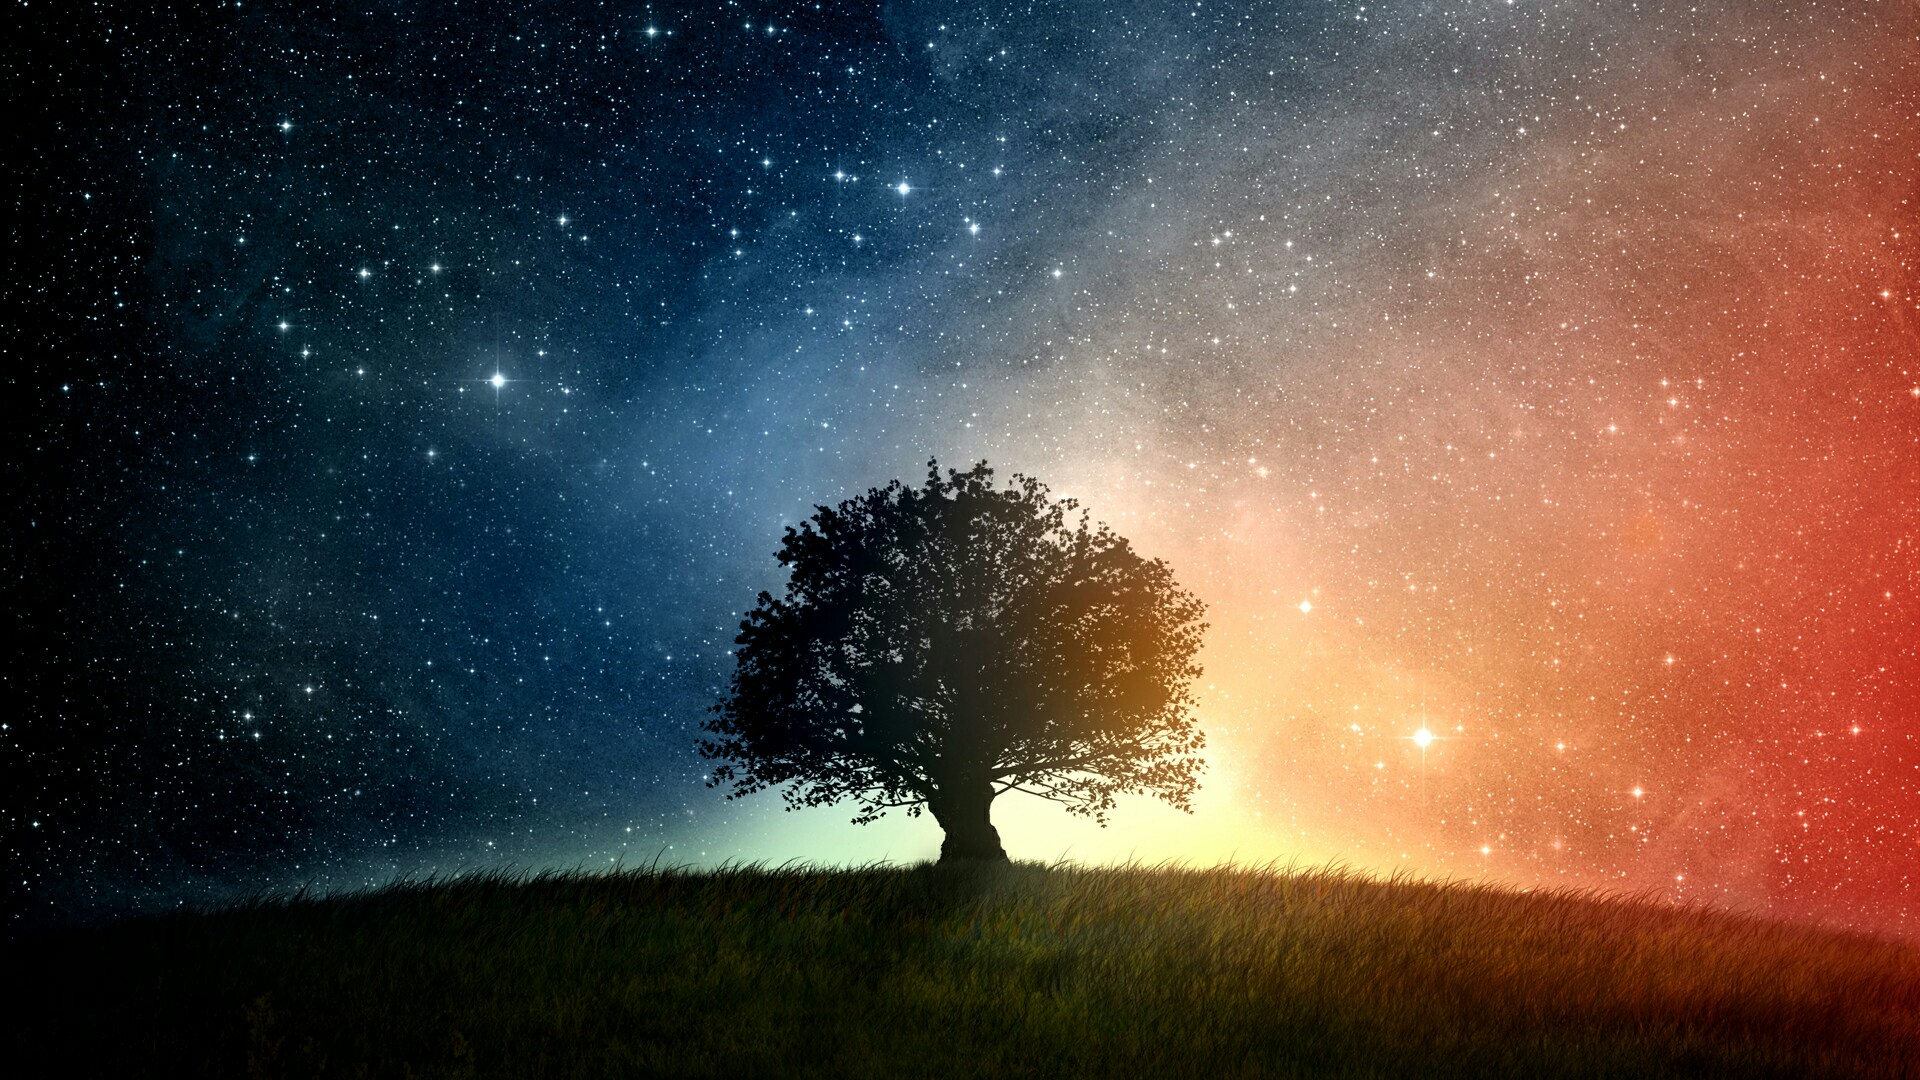 Lone tree under the starry sky wallpaper - backiee